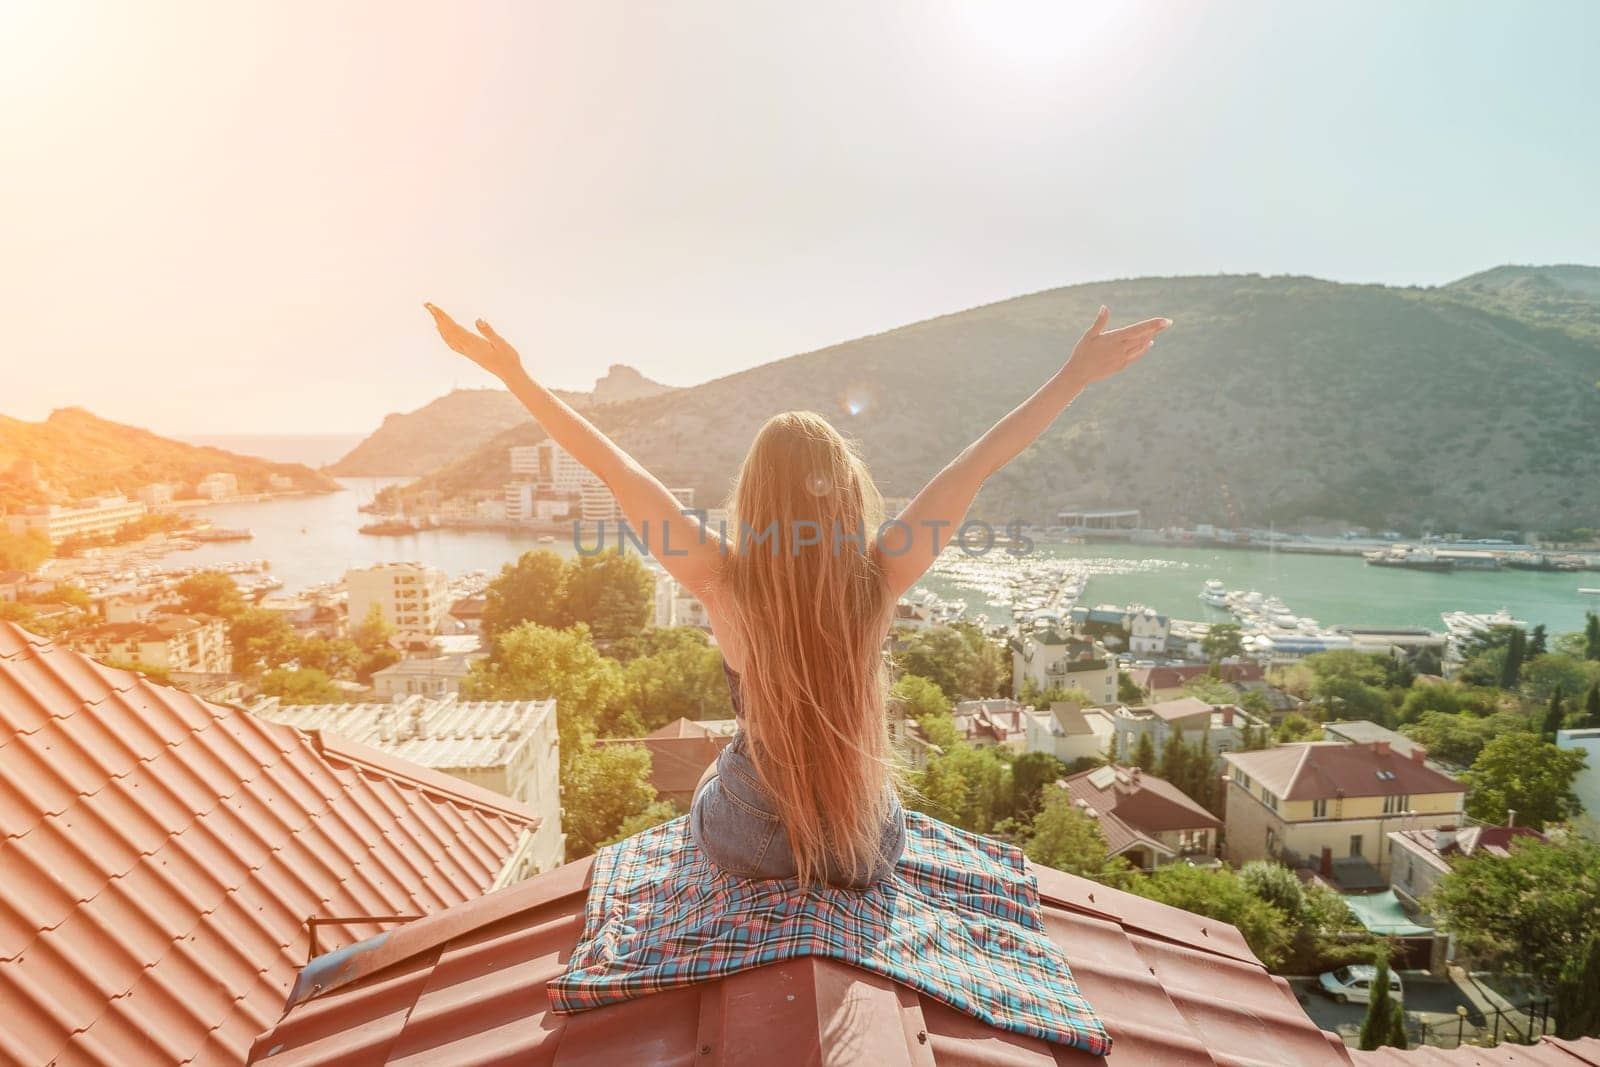 Woman sits on rooftop with outstretched arms, enjoys town view and sea mountains. Peaceful rooftop relaxation. Below her, there is a town with several boats visible in the water by Matiunina